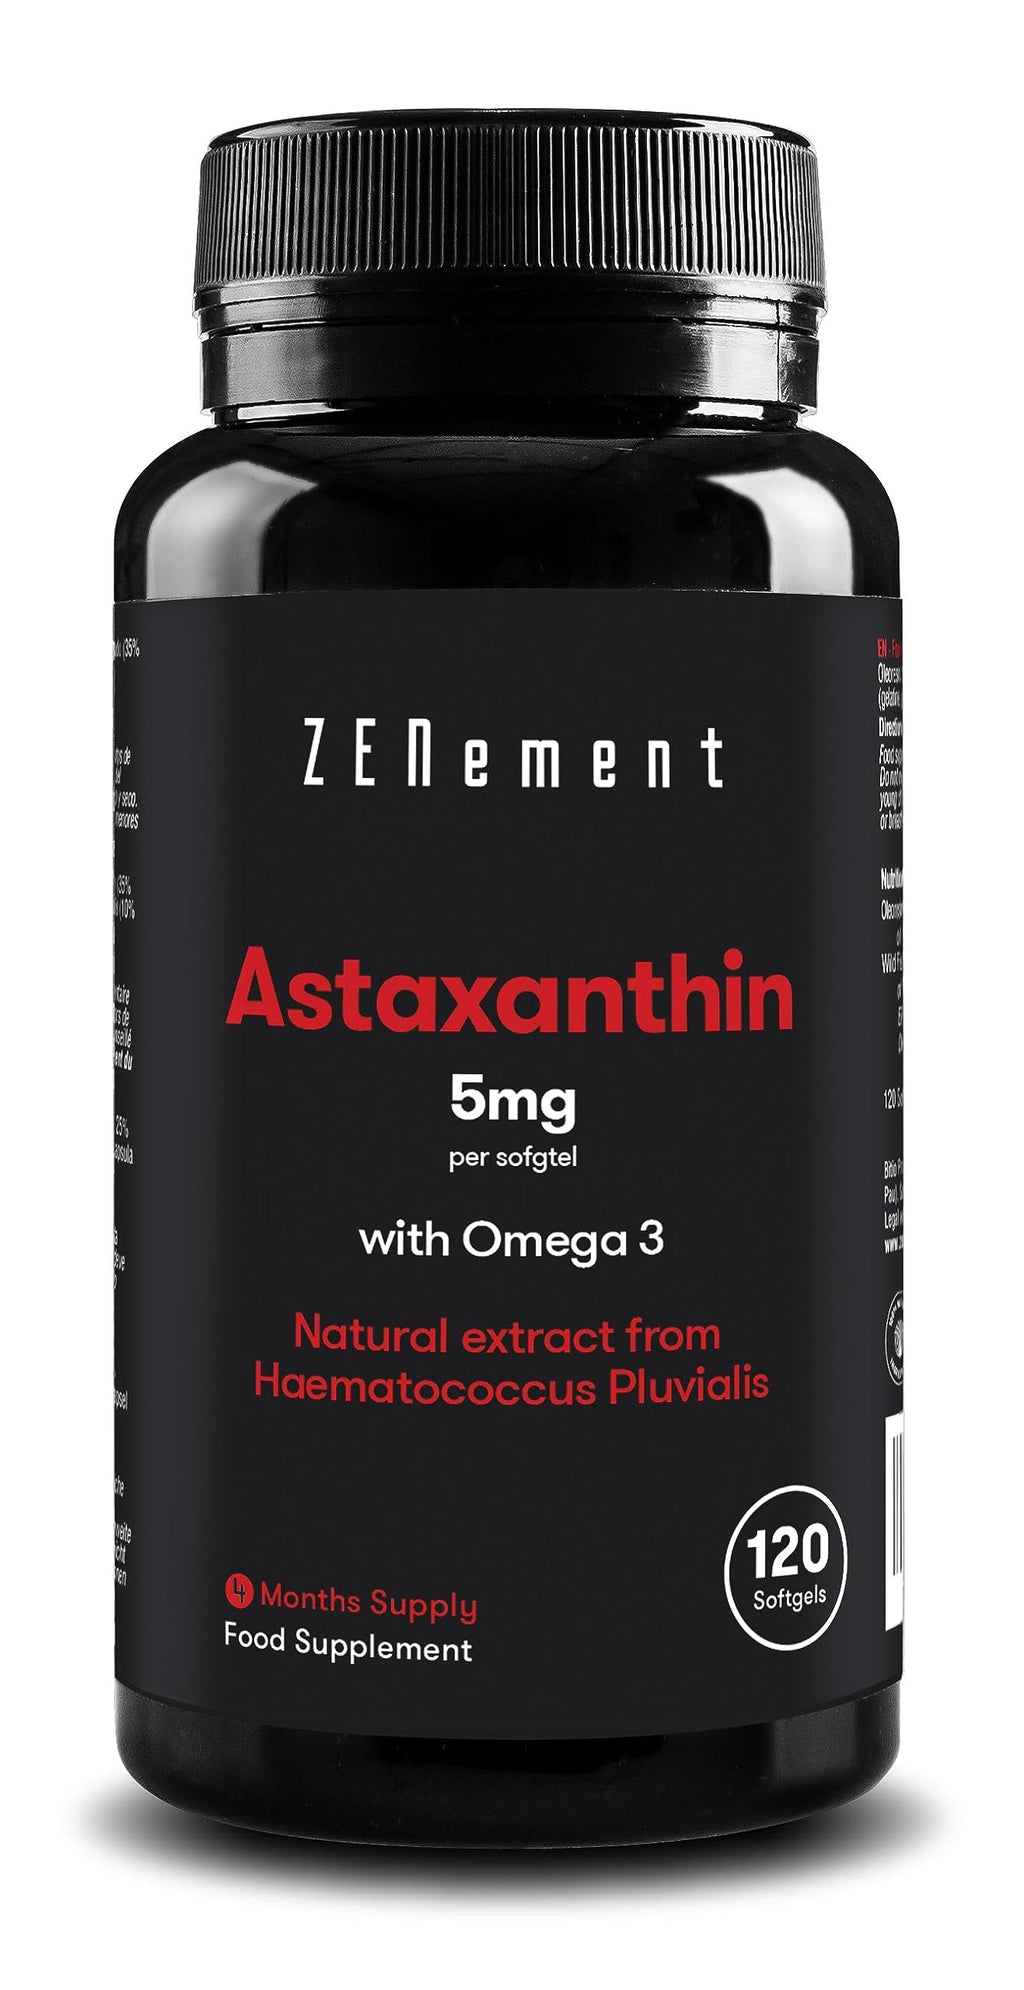 Astaxanthin, 50mg from Haematococcus Pluvialis algae | 120 softgel capsules with oxidation protection | Natural high-dose astaxanthin seaweed | With Omega 3 | Zenement - NewNest Australia